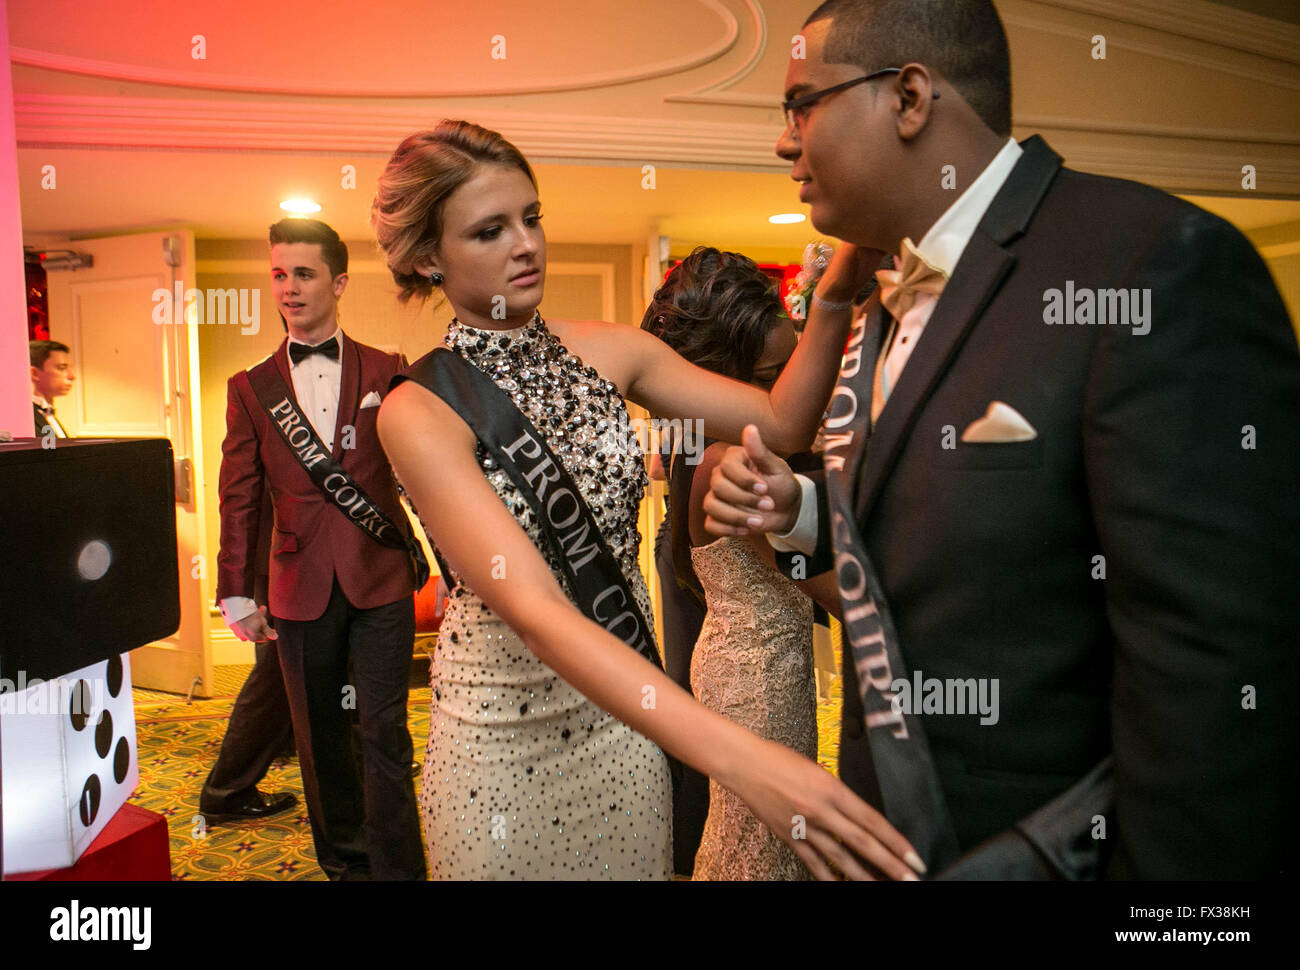 West Palm Beach, Florida, USA. 10th Apr, 2016. Mikal Bartosik straightens Jonathan Ramilo's prom court sash before the crowning of the prom King and Queen. © Allen Eyestone/The Palm Beach Post/ZUMA Wire/Alamy Live News Stock Photo